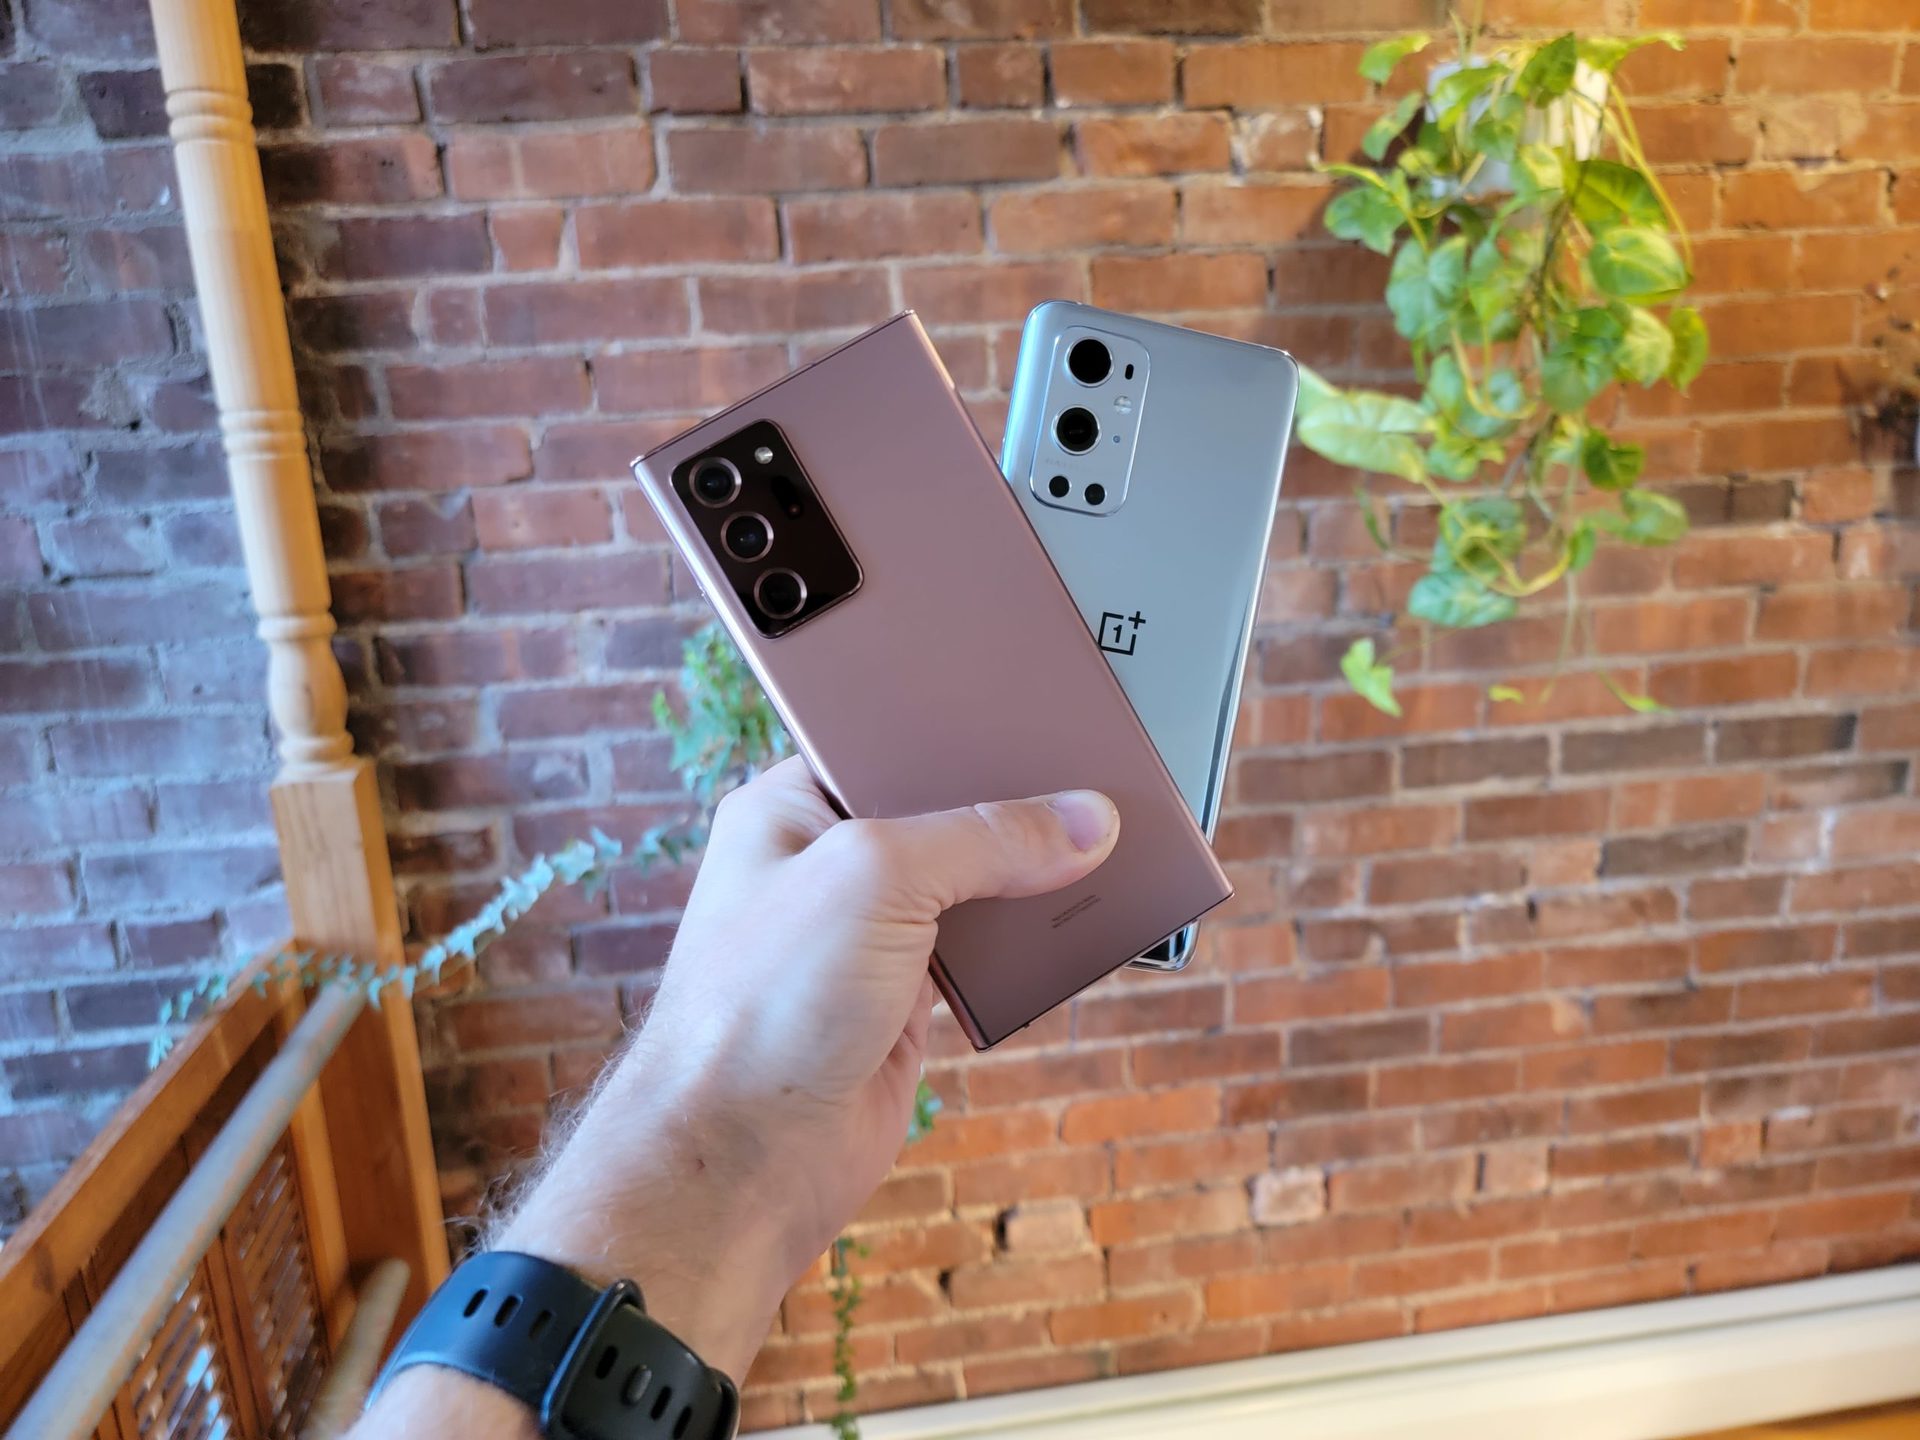 Hand holding the Samsung Galaxy Note 20 Ultra and the OnePlus 9 Pro.